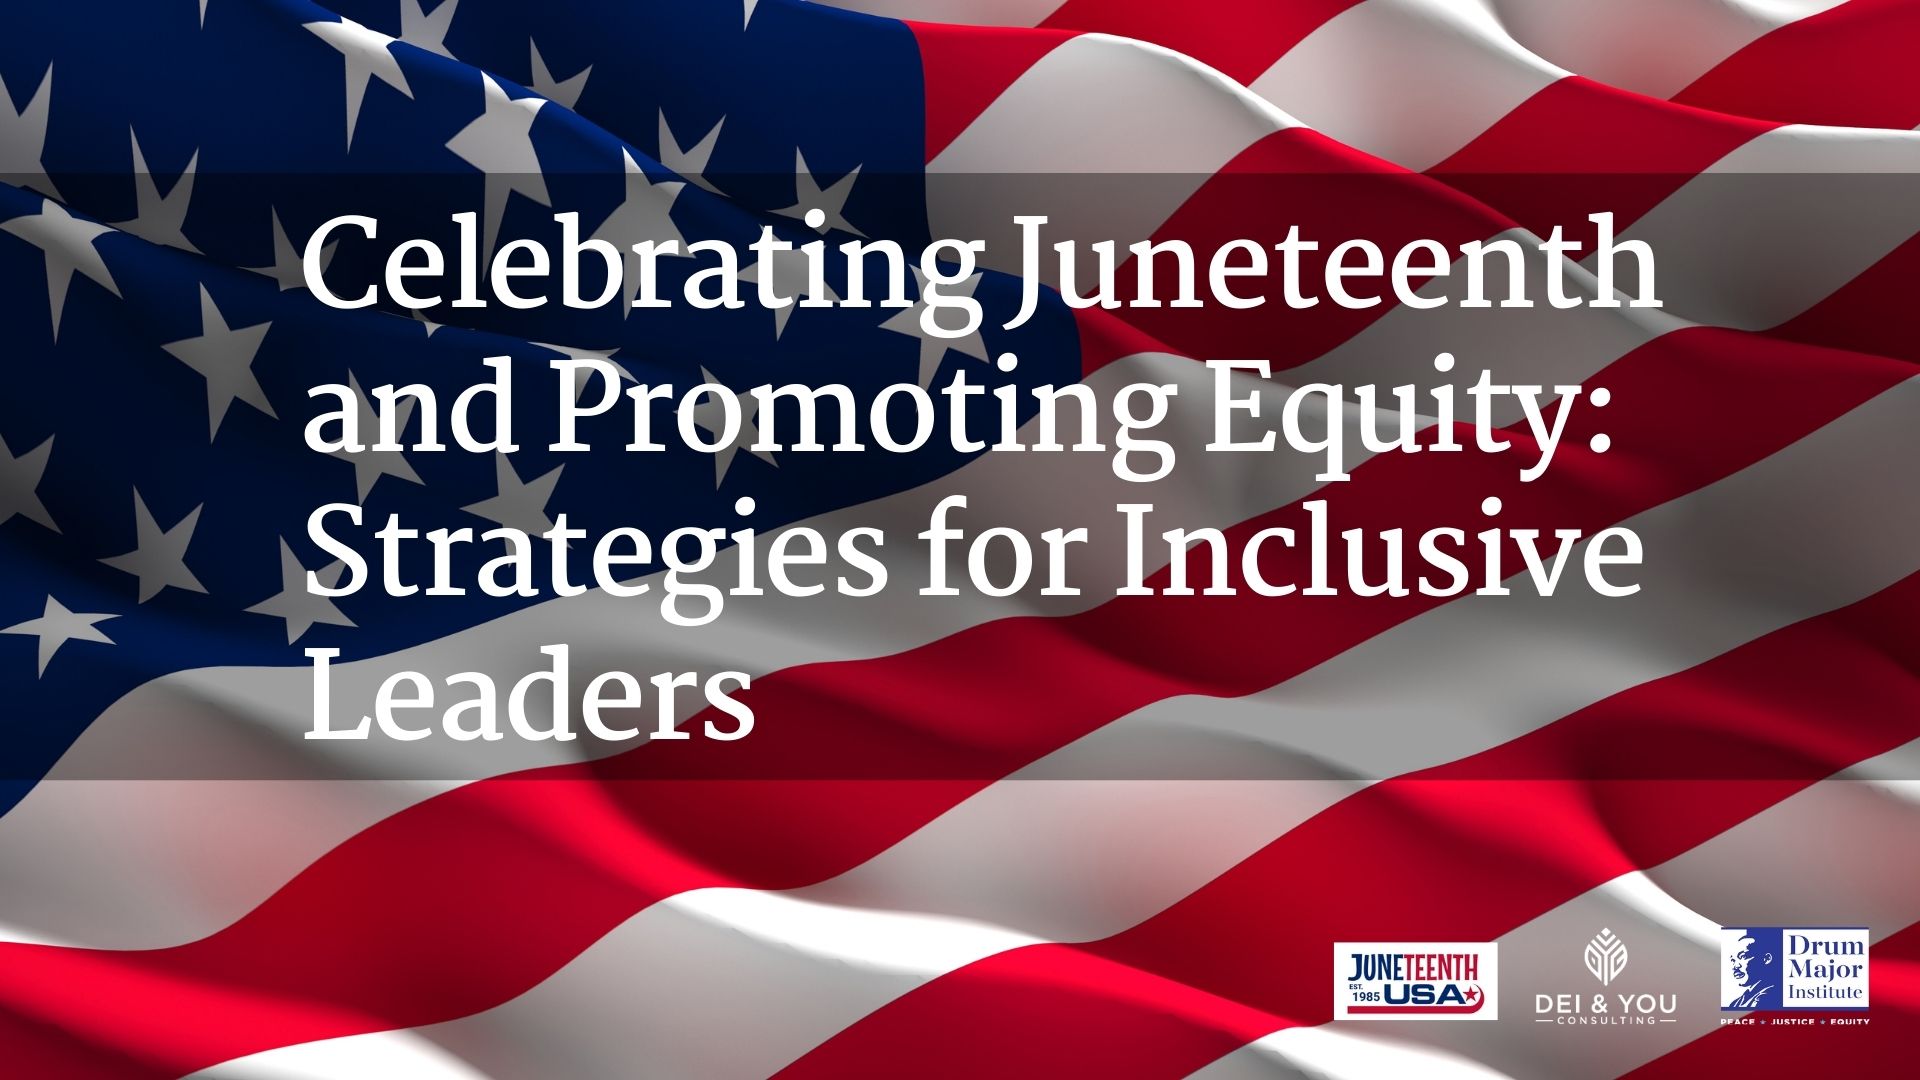 Celebrating Juneteenth and Promoting Equity Strategies for Inclusive Leaders